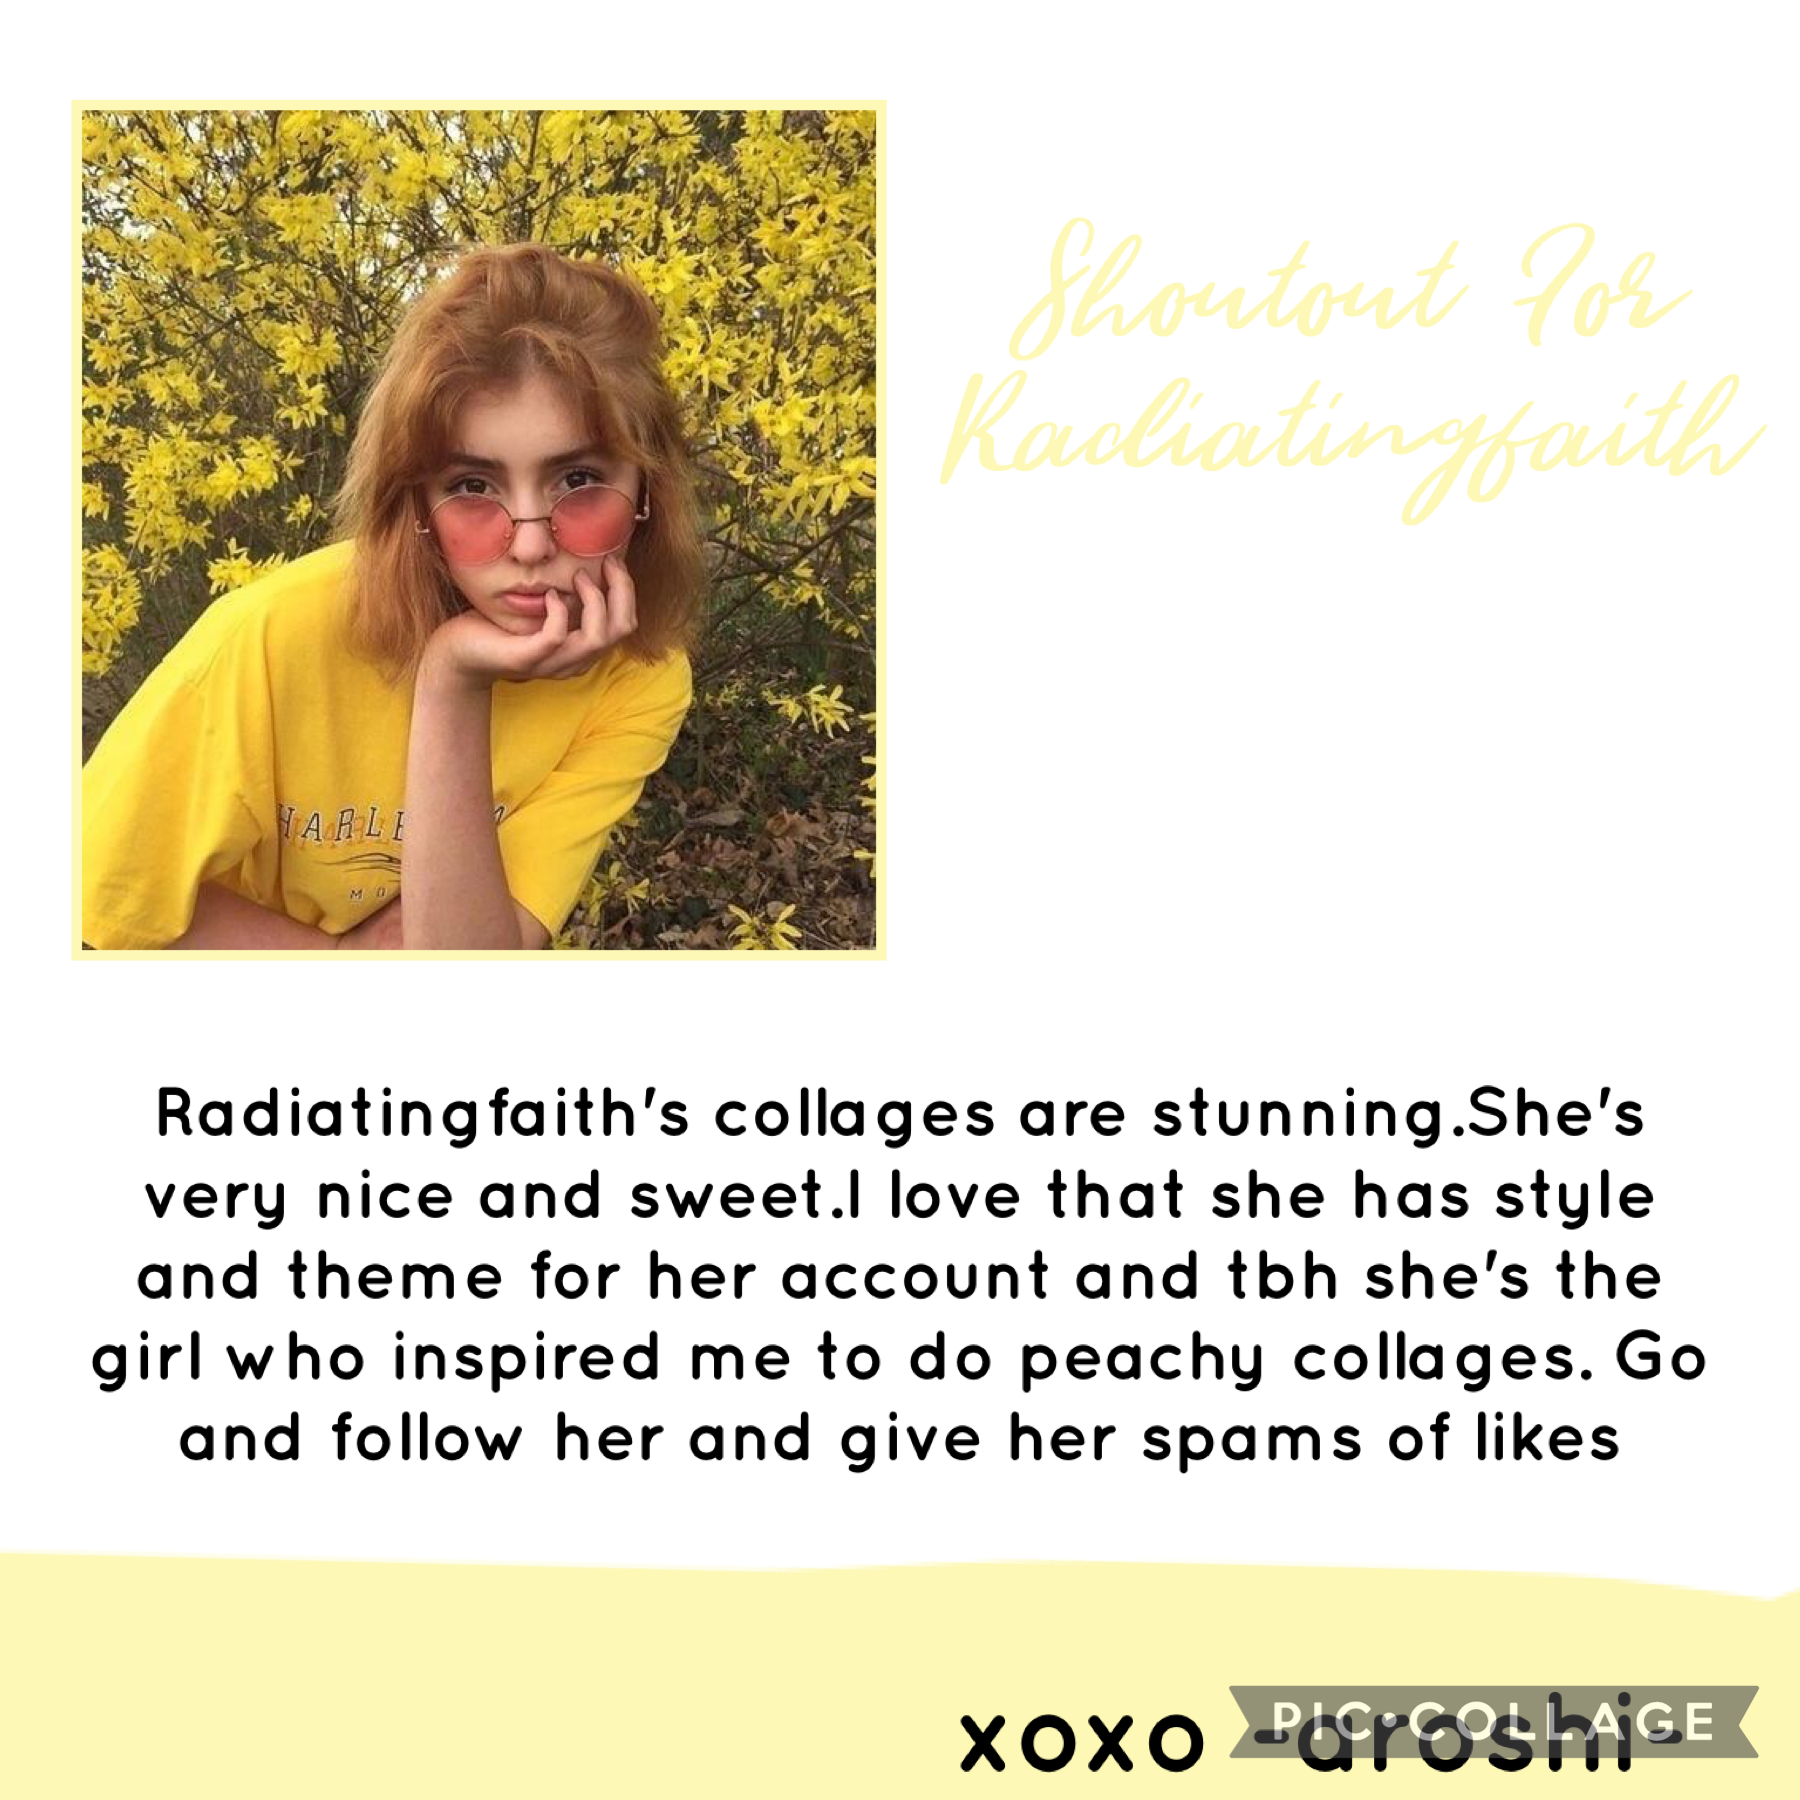 Shoutout For Radiatingfaith!! Follow and like her posts